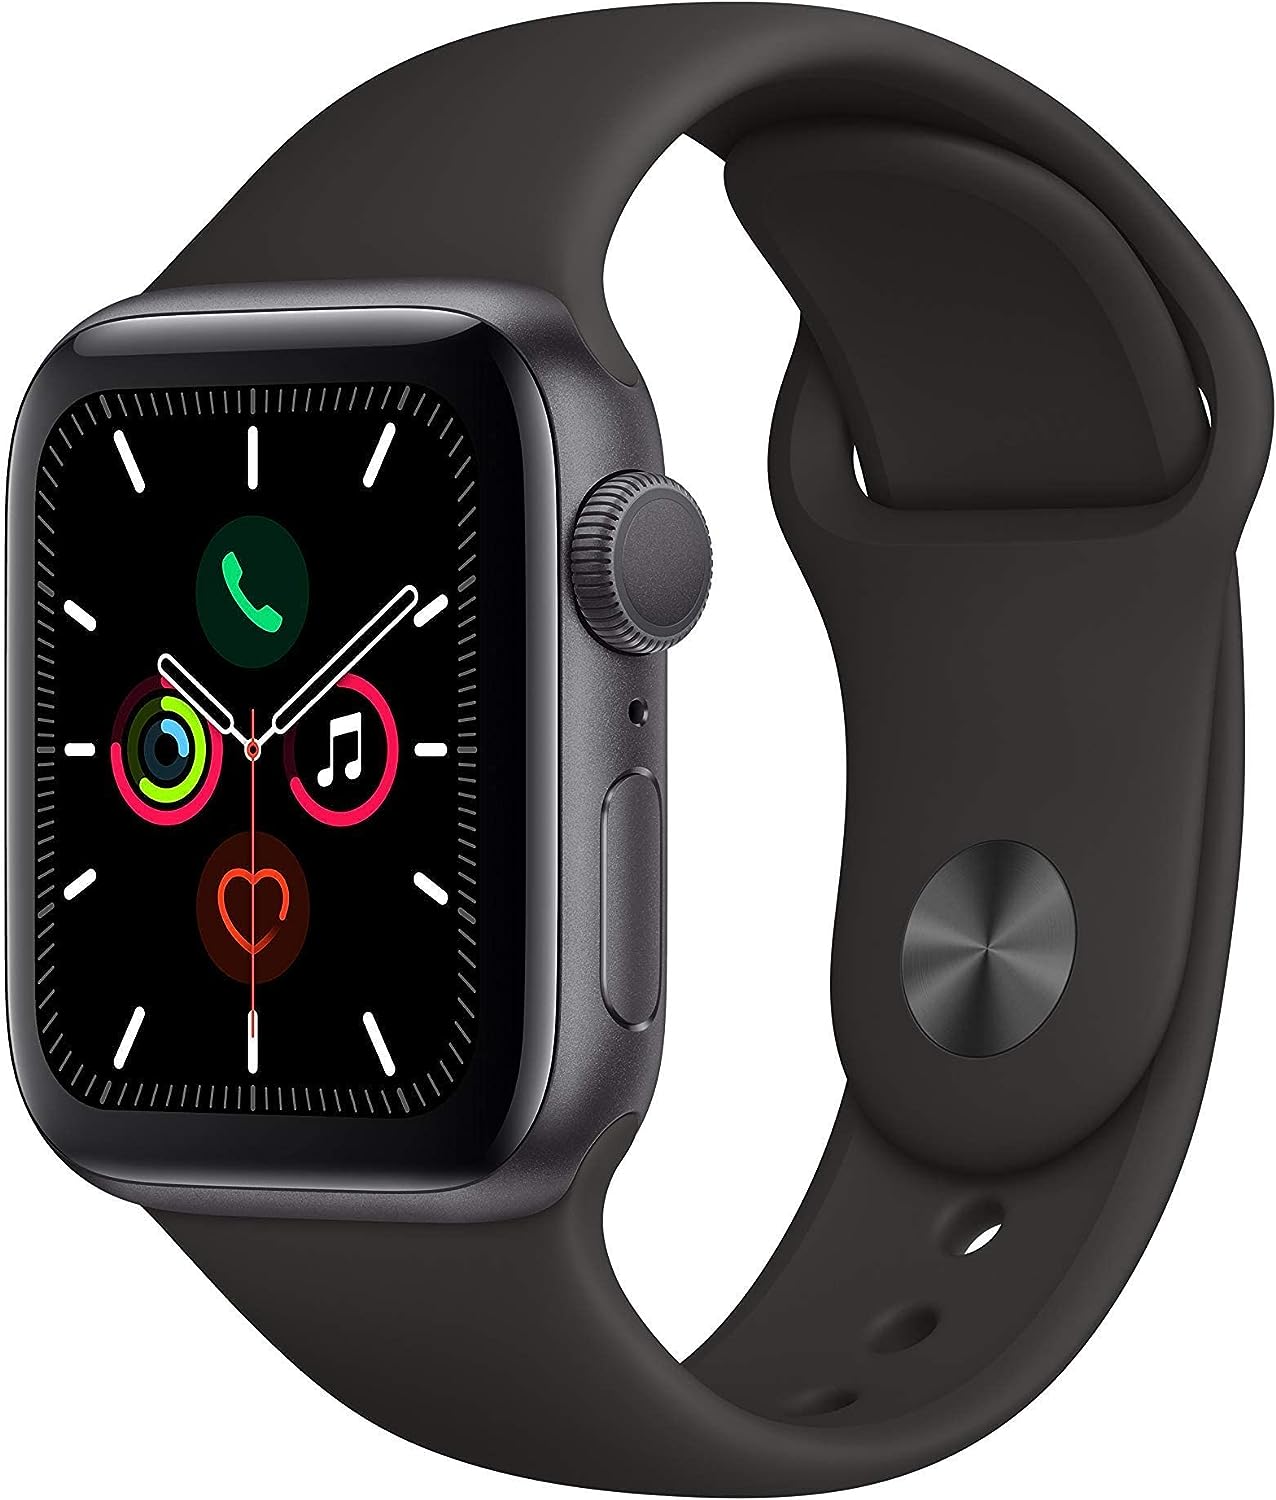 Apple Watch Series 5 Review: A Great Smartwatch Option